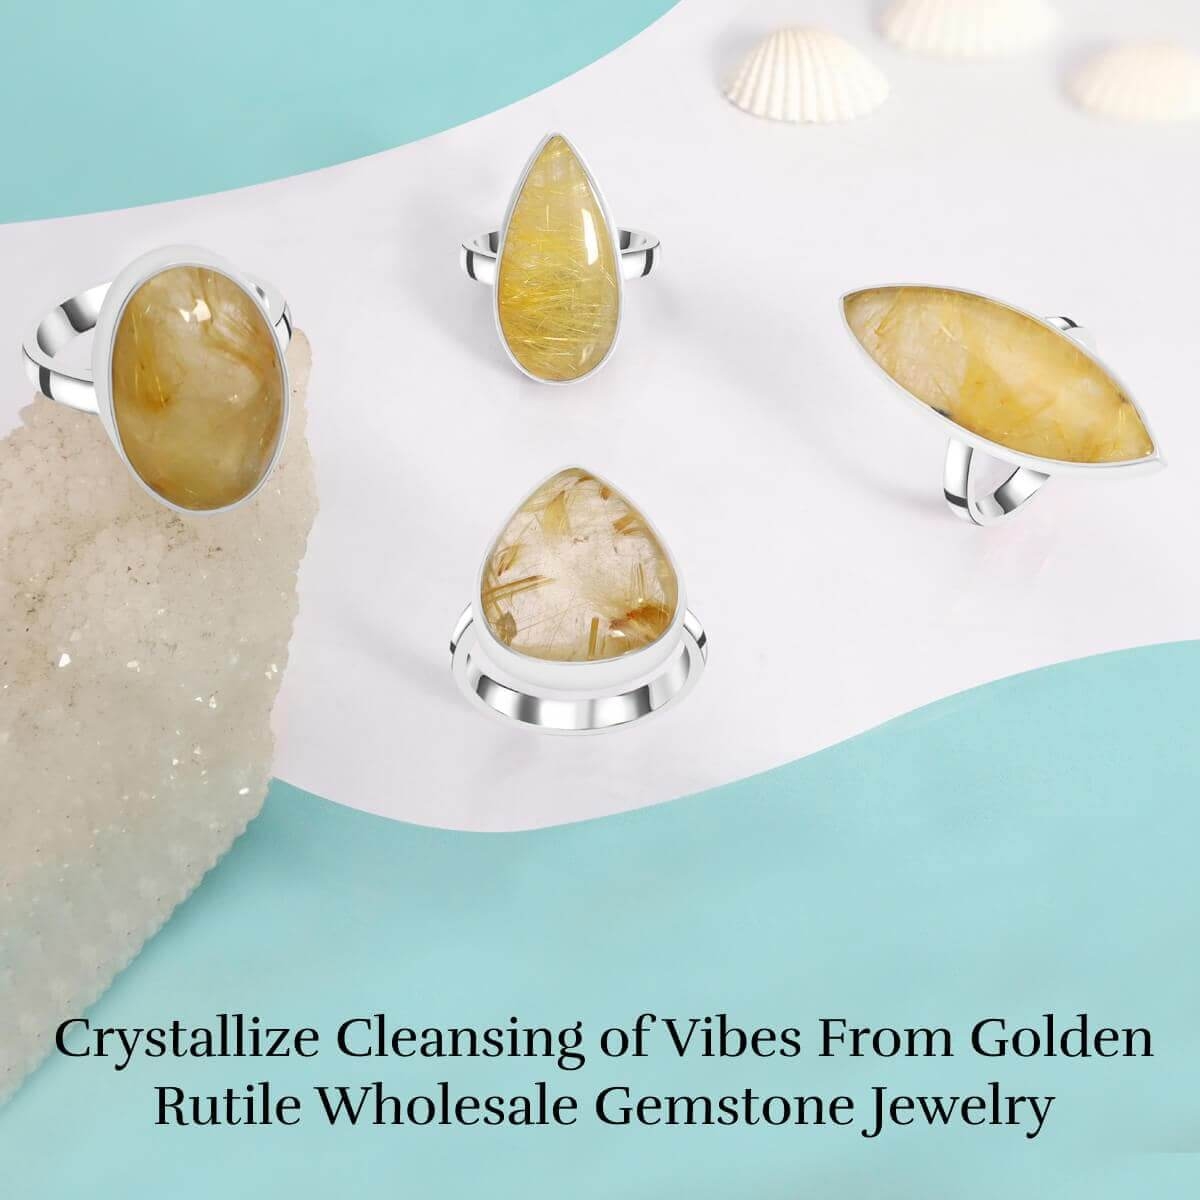 Purify Your Aura with Golden Rutile Wholesale Gemstone Jewelry